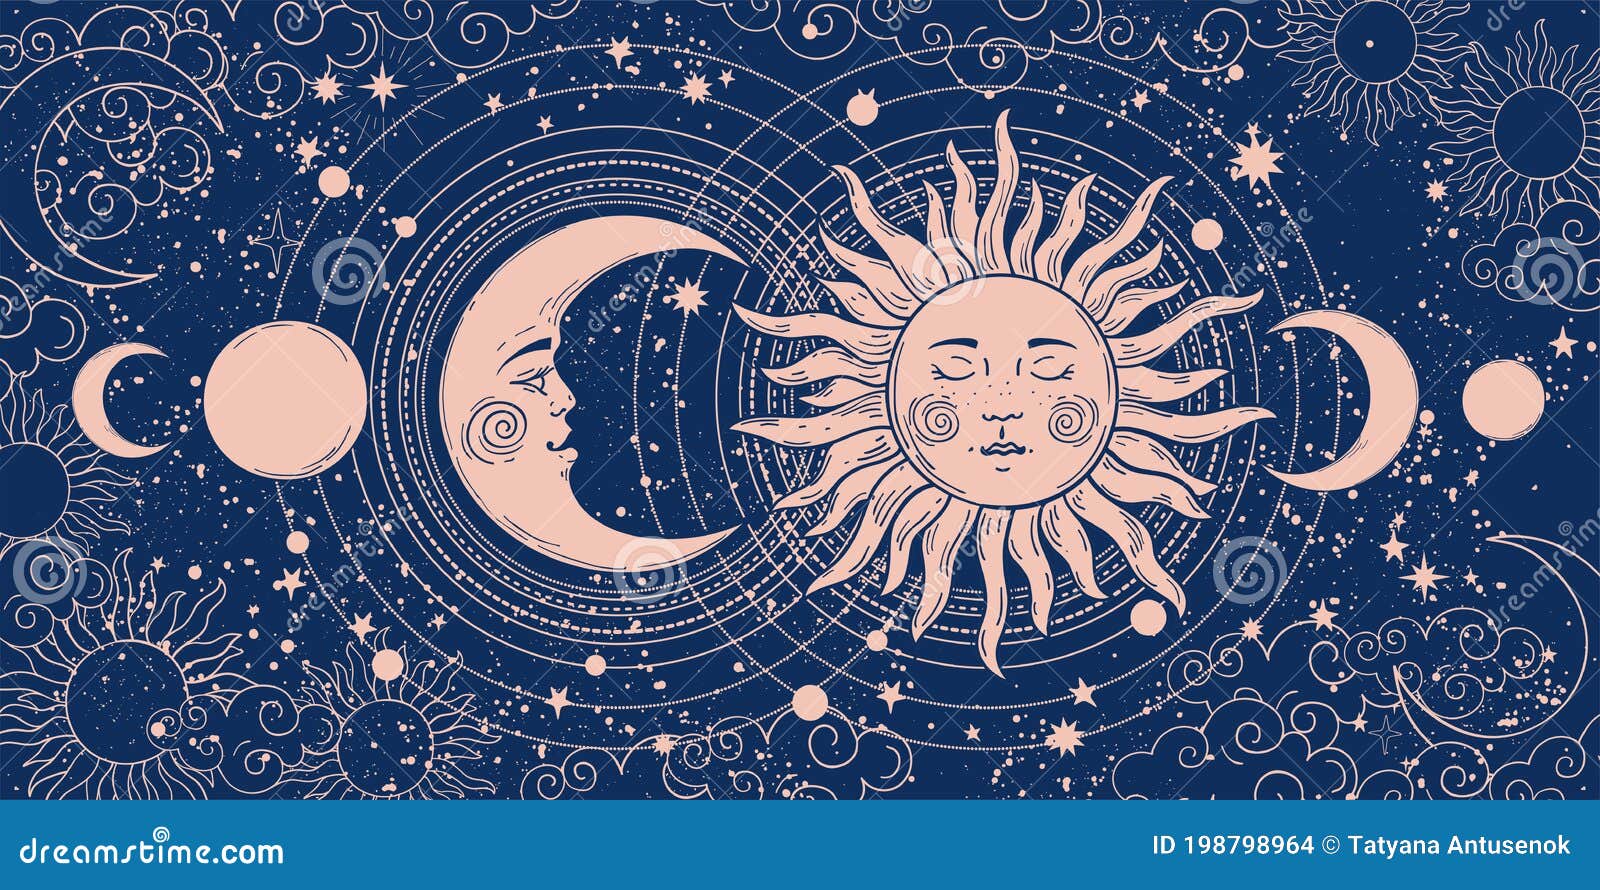 magic banner for astrology, tarot, boho . universe art, crescent moon and sun on a blue background. esoteric